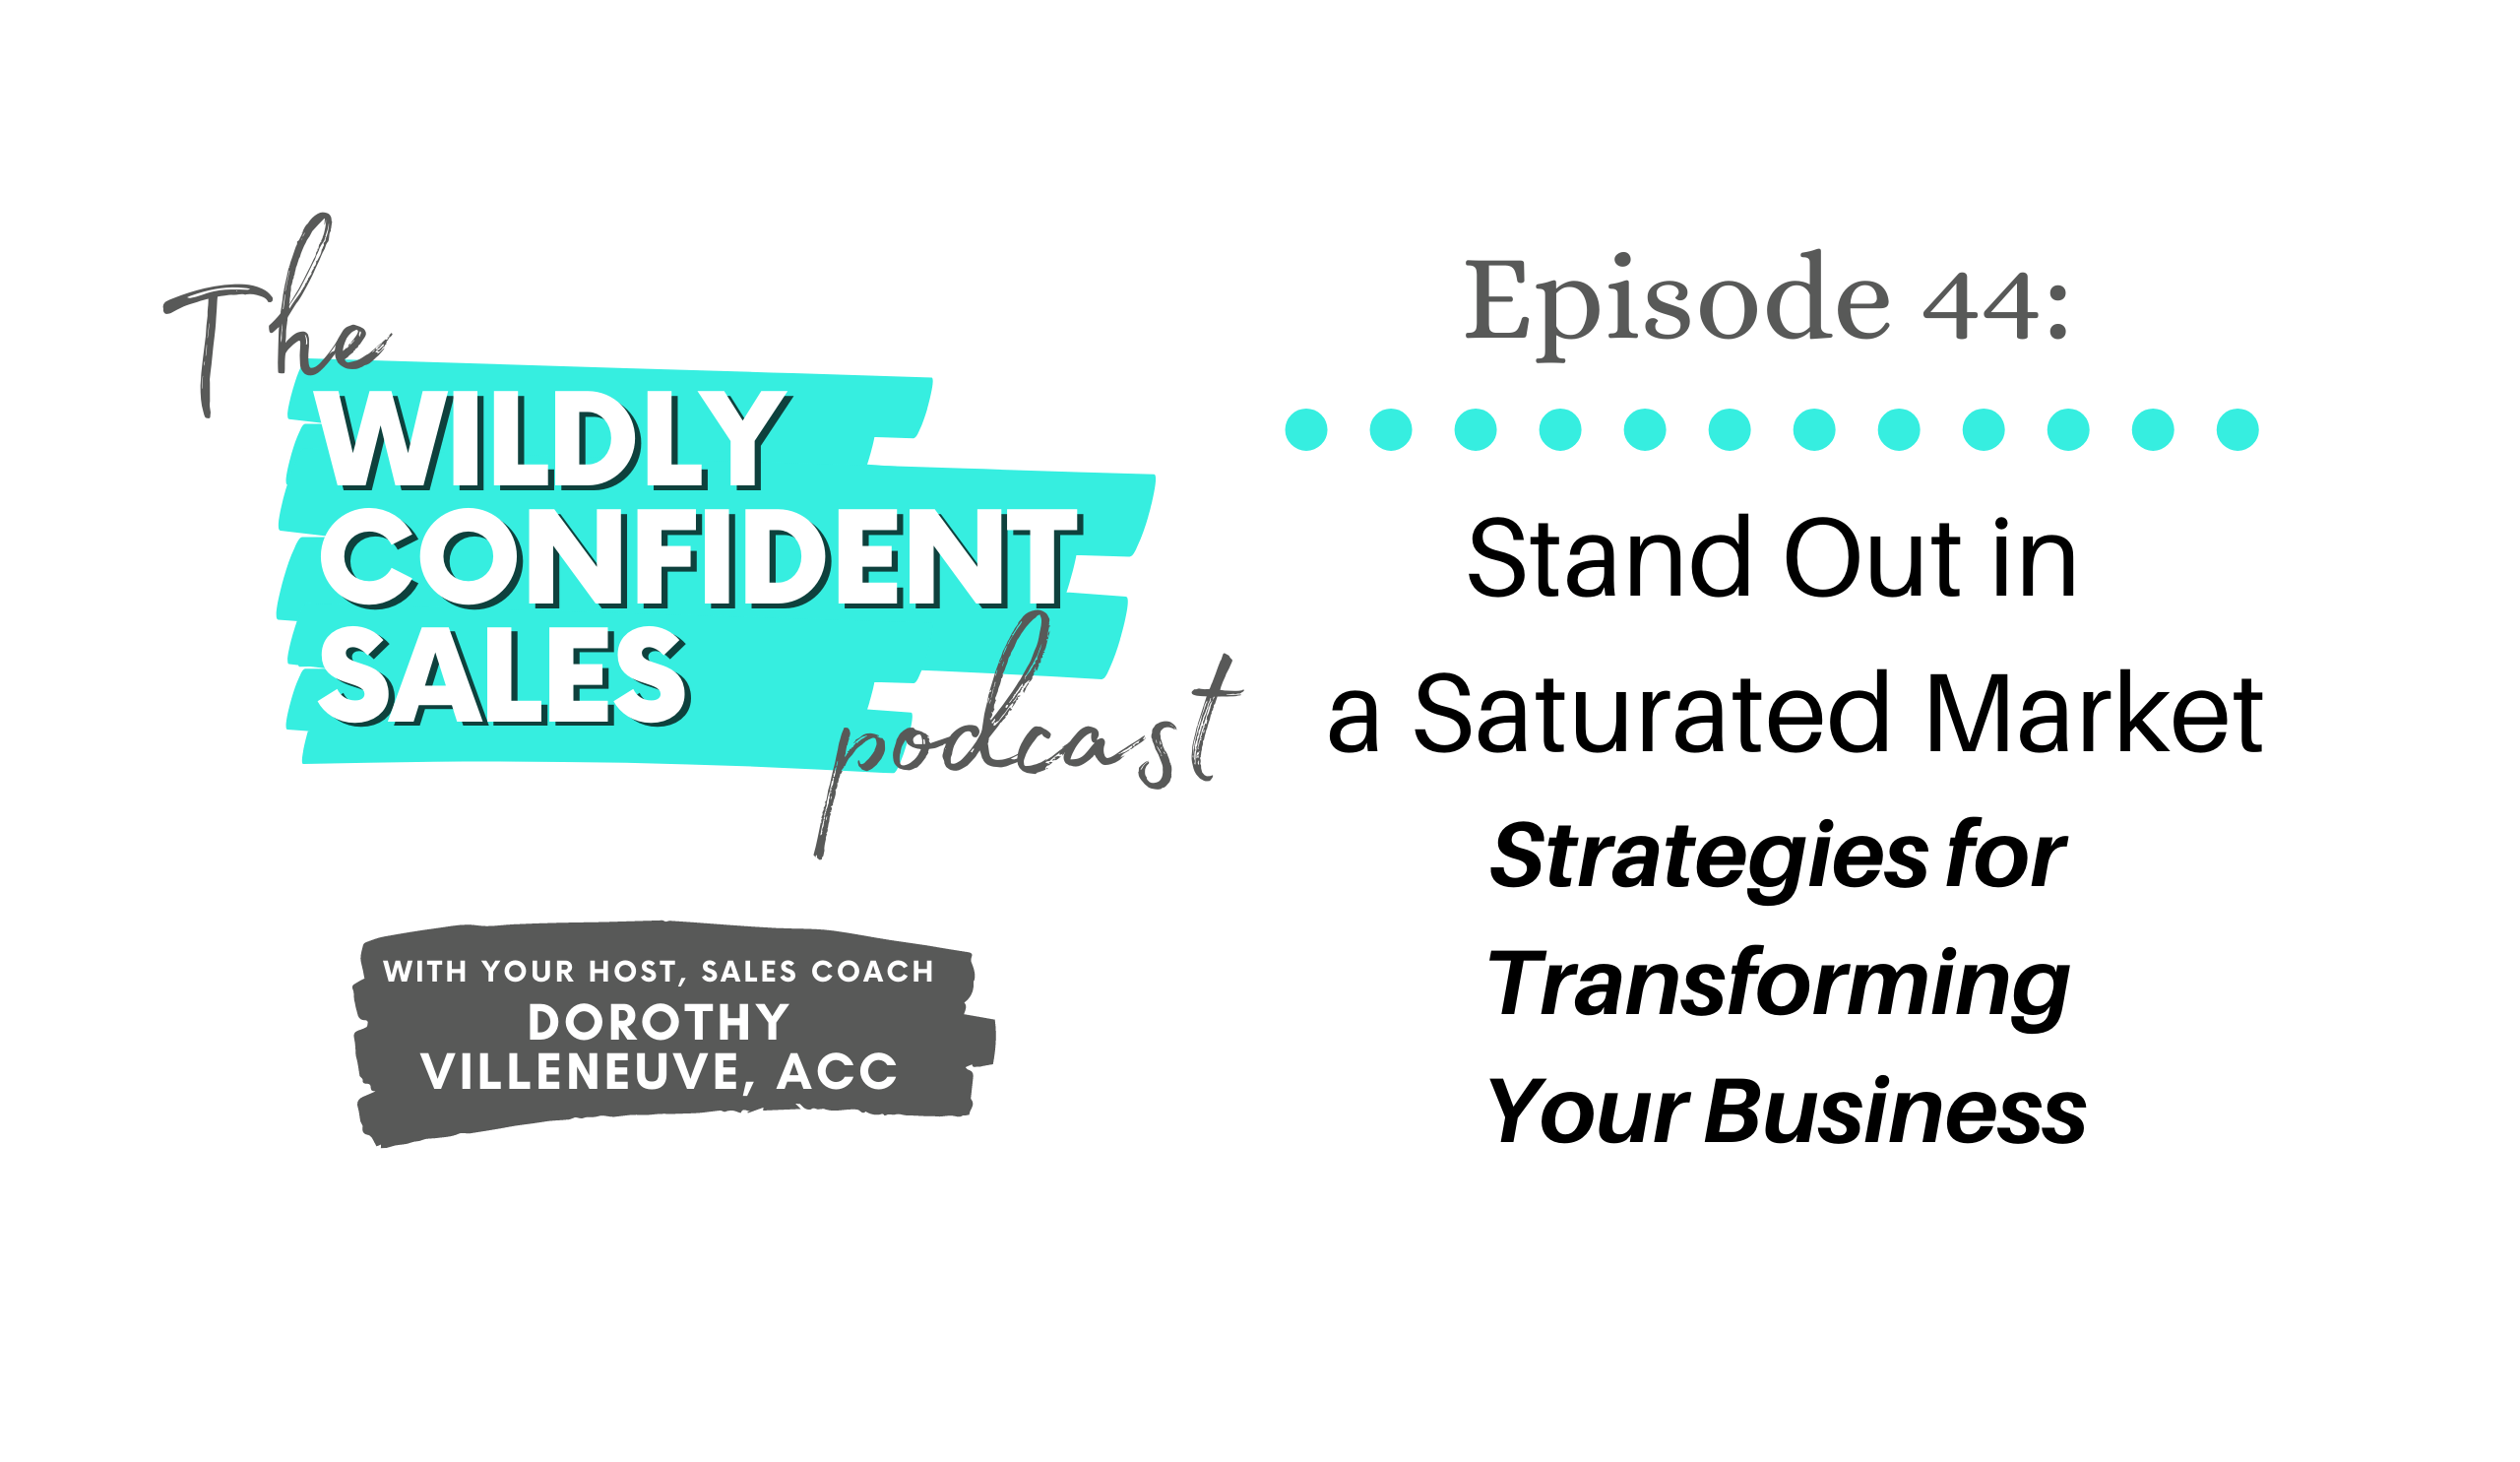 Stand Out in a Saturated Market – Strategies for Transforming Your Business